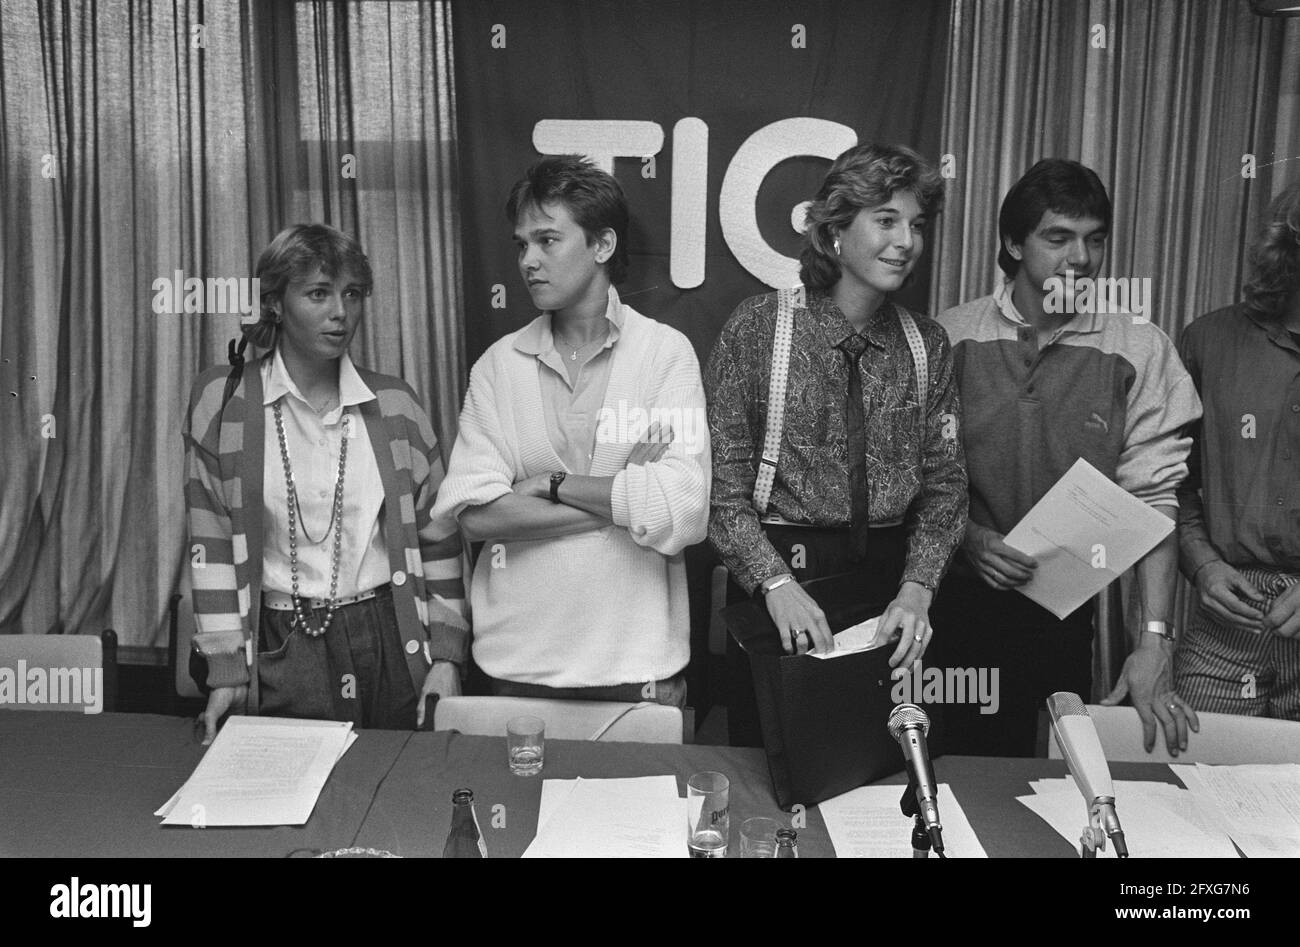 Meeting of the Association of Topsport(st)ers (TIG); fltr: boardmembers Ria Visser, Bettine Vriesekoop, Marcella Mesker (pres.) and Hein Vergeer, October 13, 1986, sports, athletes, associations, meetings, The Netherlands, 20th century press agency photo, news to remember, documentary, historic photography 1945-1990, visual stories, human history of the Twentieth Century, capturing moments in time Stock Photo